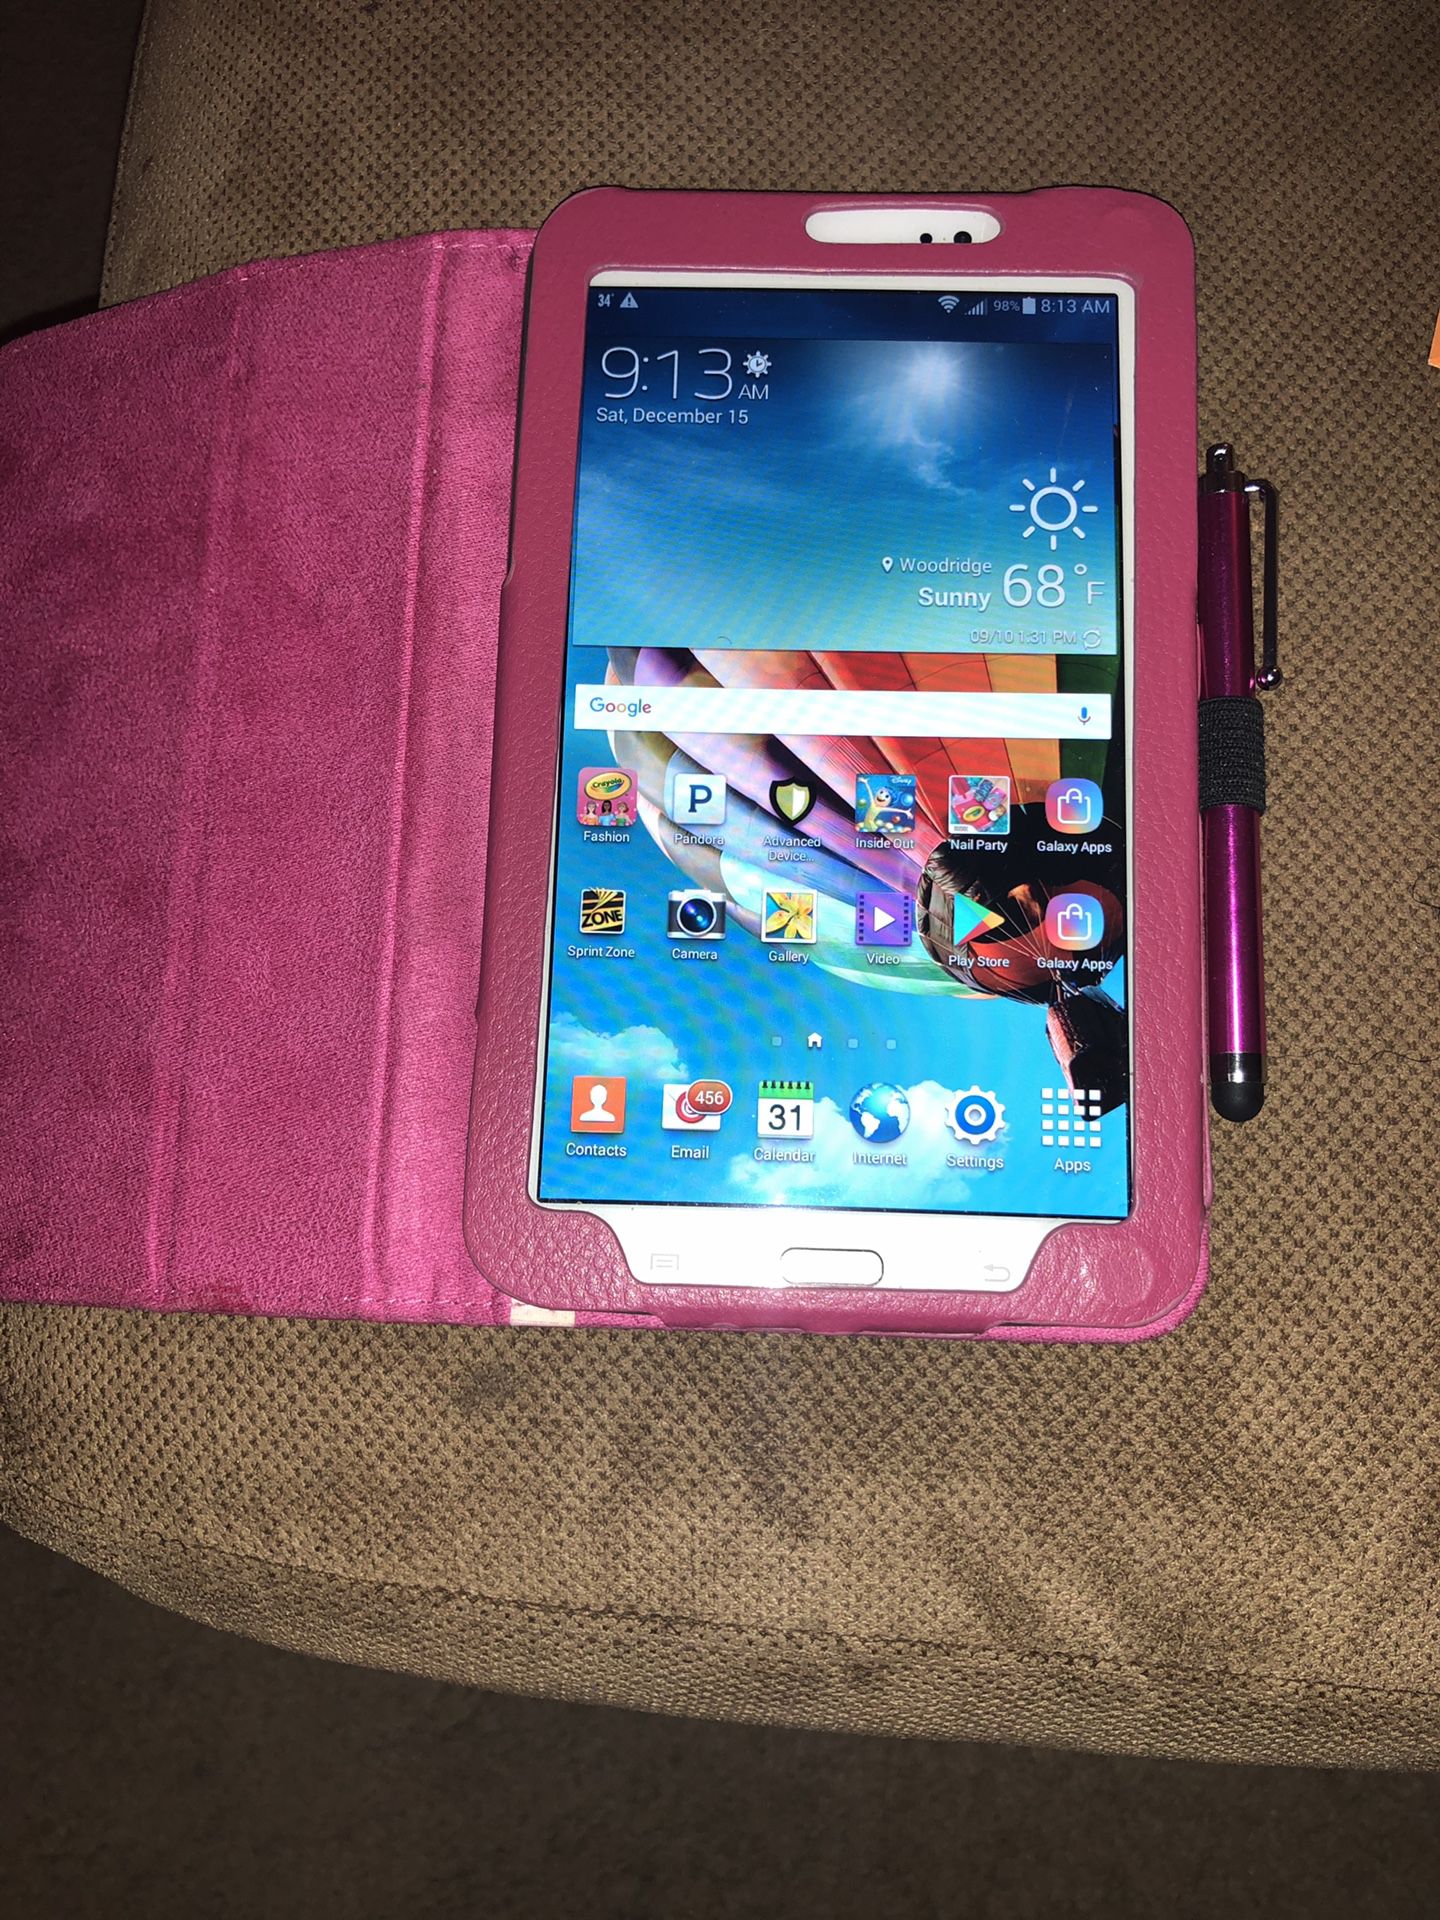 Samsung Galaxy S3 Tablet with stylus and case